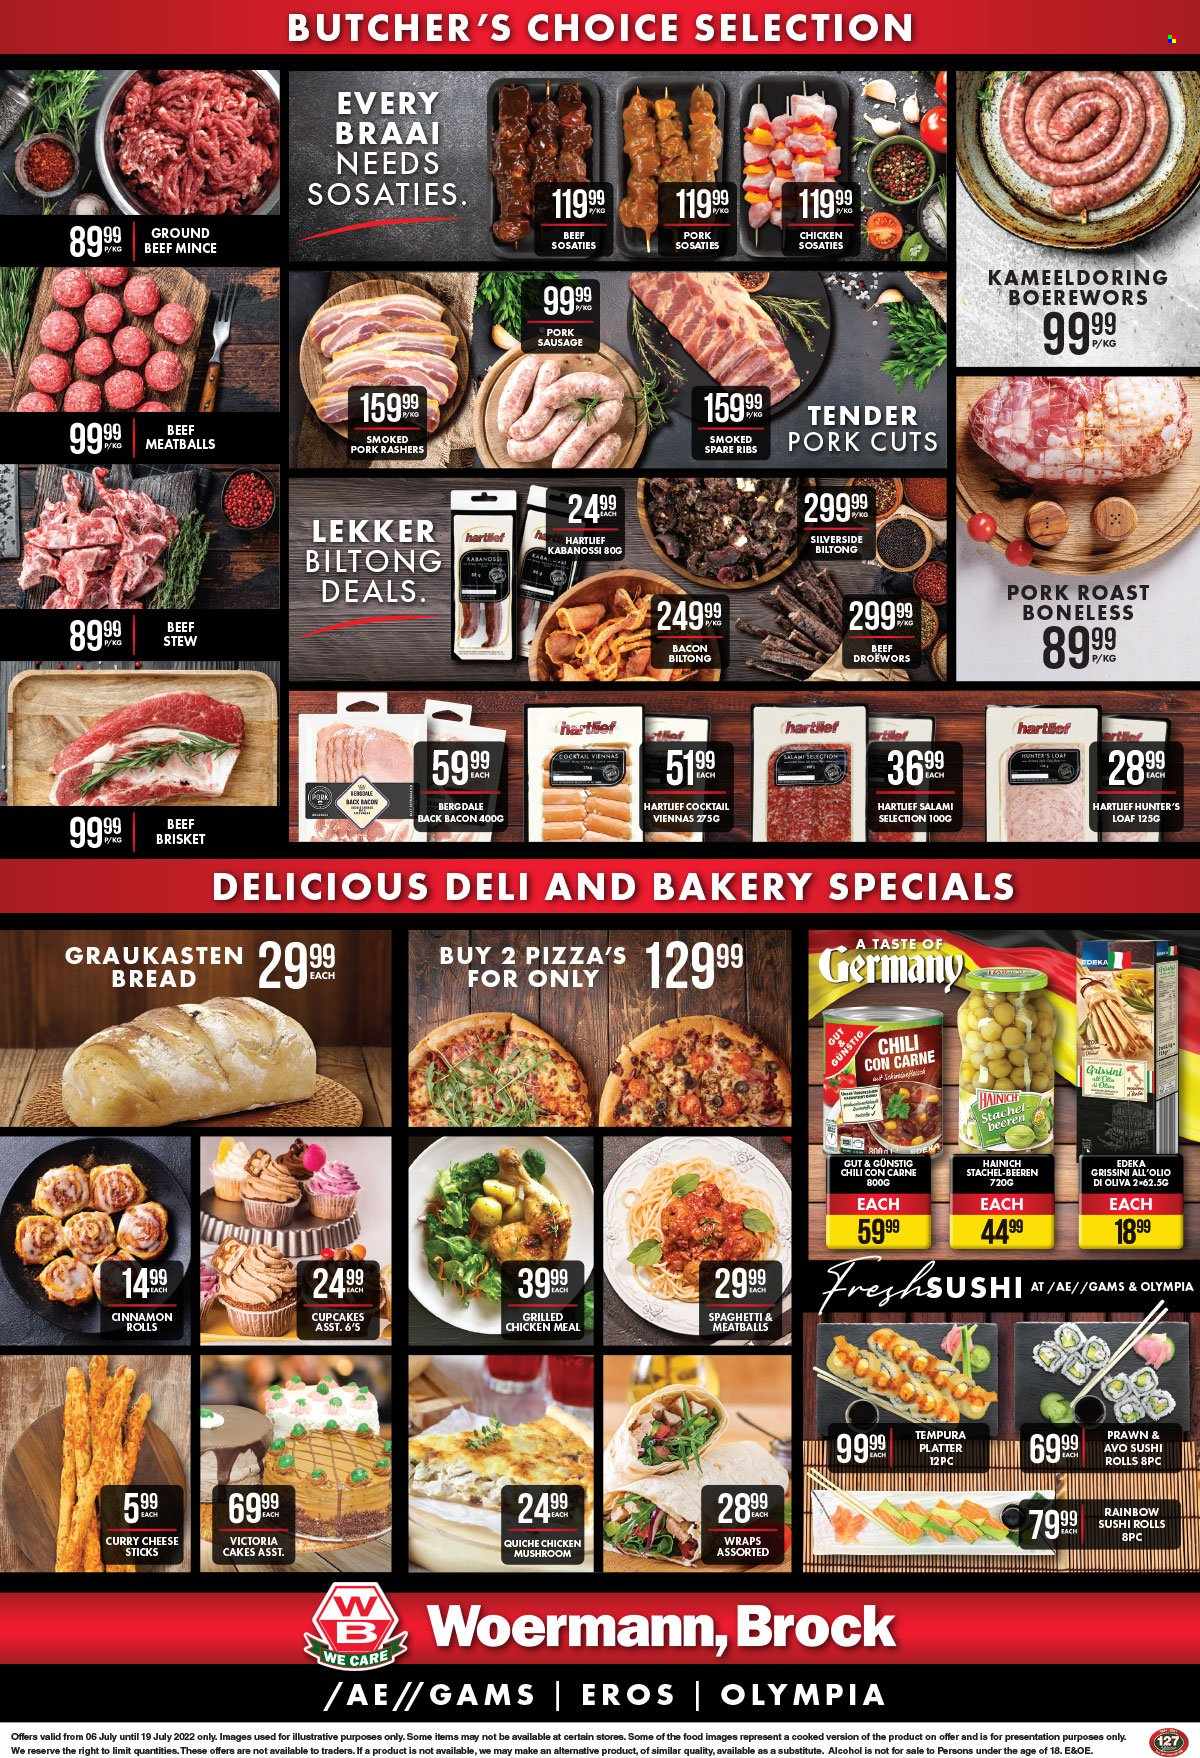 Woermann Brock catalogue  - 06/07/2022 - 19/07/2022 - Sales products - bread, cake, wraps, cinnamon roll, cupcake, prawns, spaghetti, pizza, meatballs, bacon, salami, sausage, vienna sausage, pork sausage, cheese sticks, quiche, Victoria Sponge, grissini, alcohol, beef meat, ground beef, beef brisket, pork meat, pork roast, pork spare ribs, braai wors. Page 2.